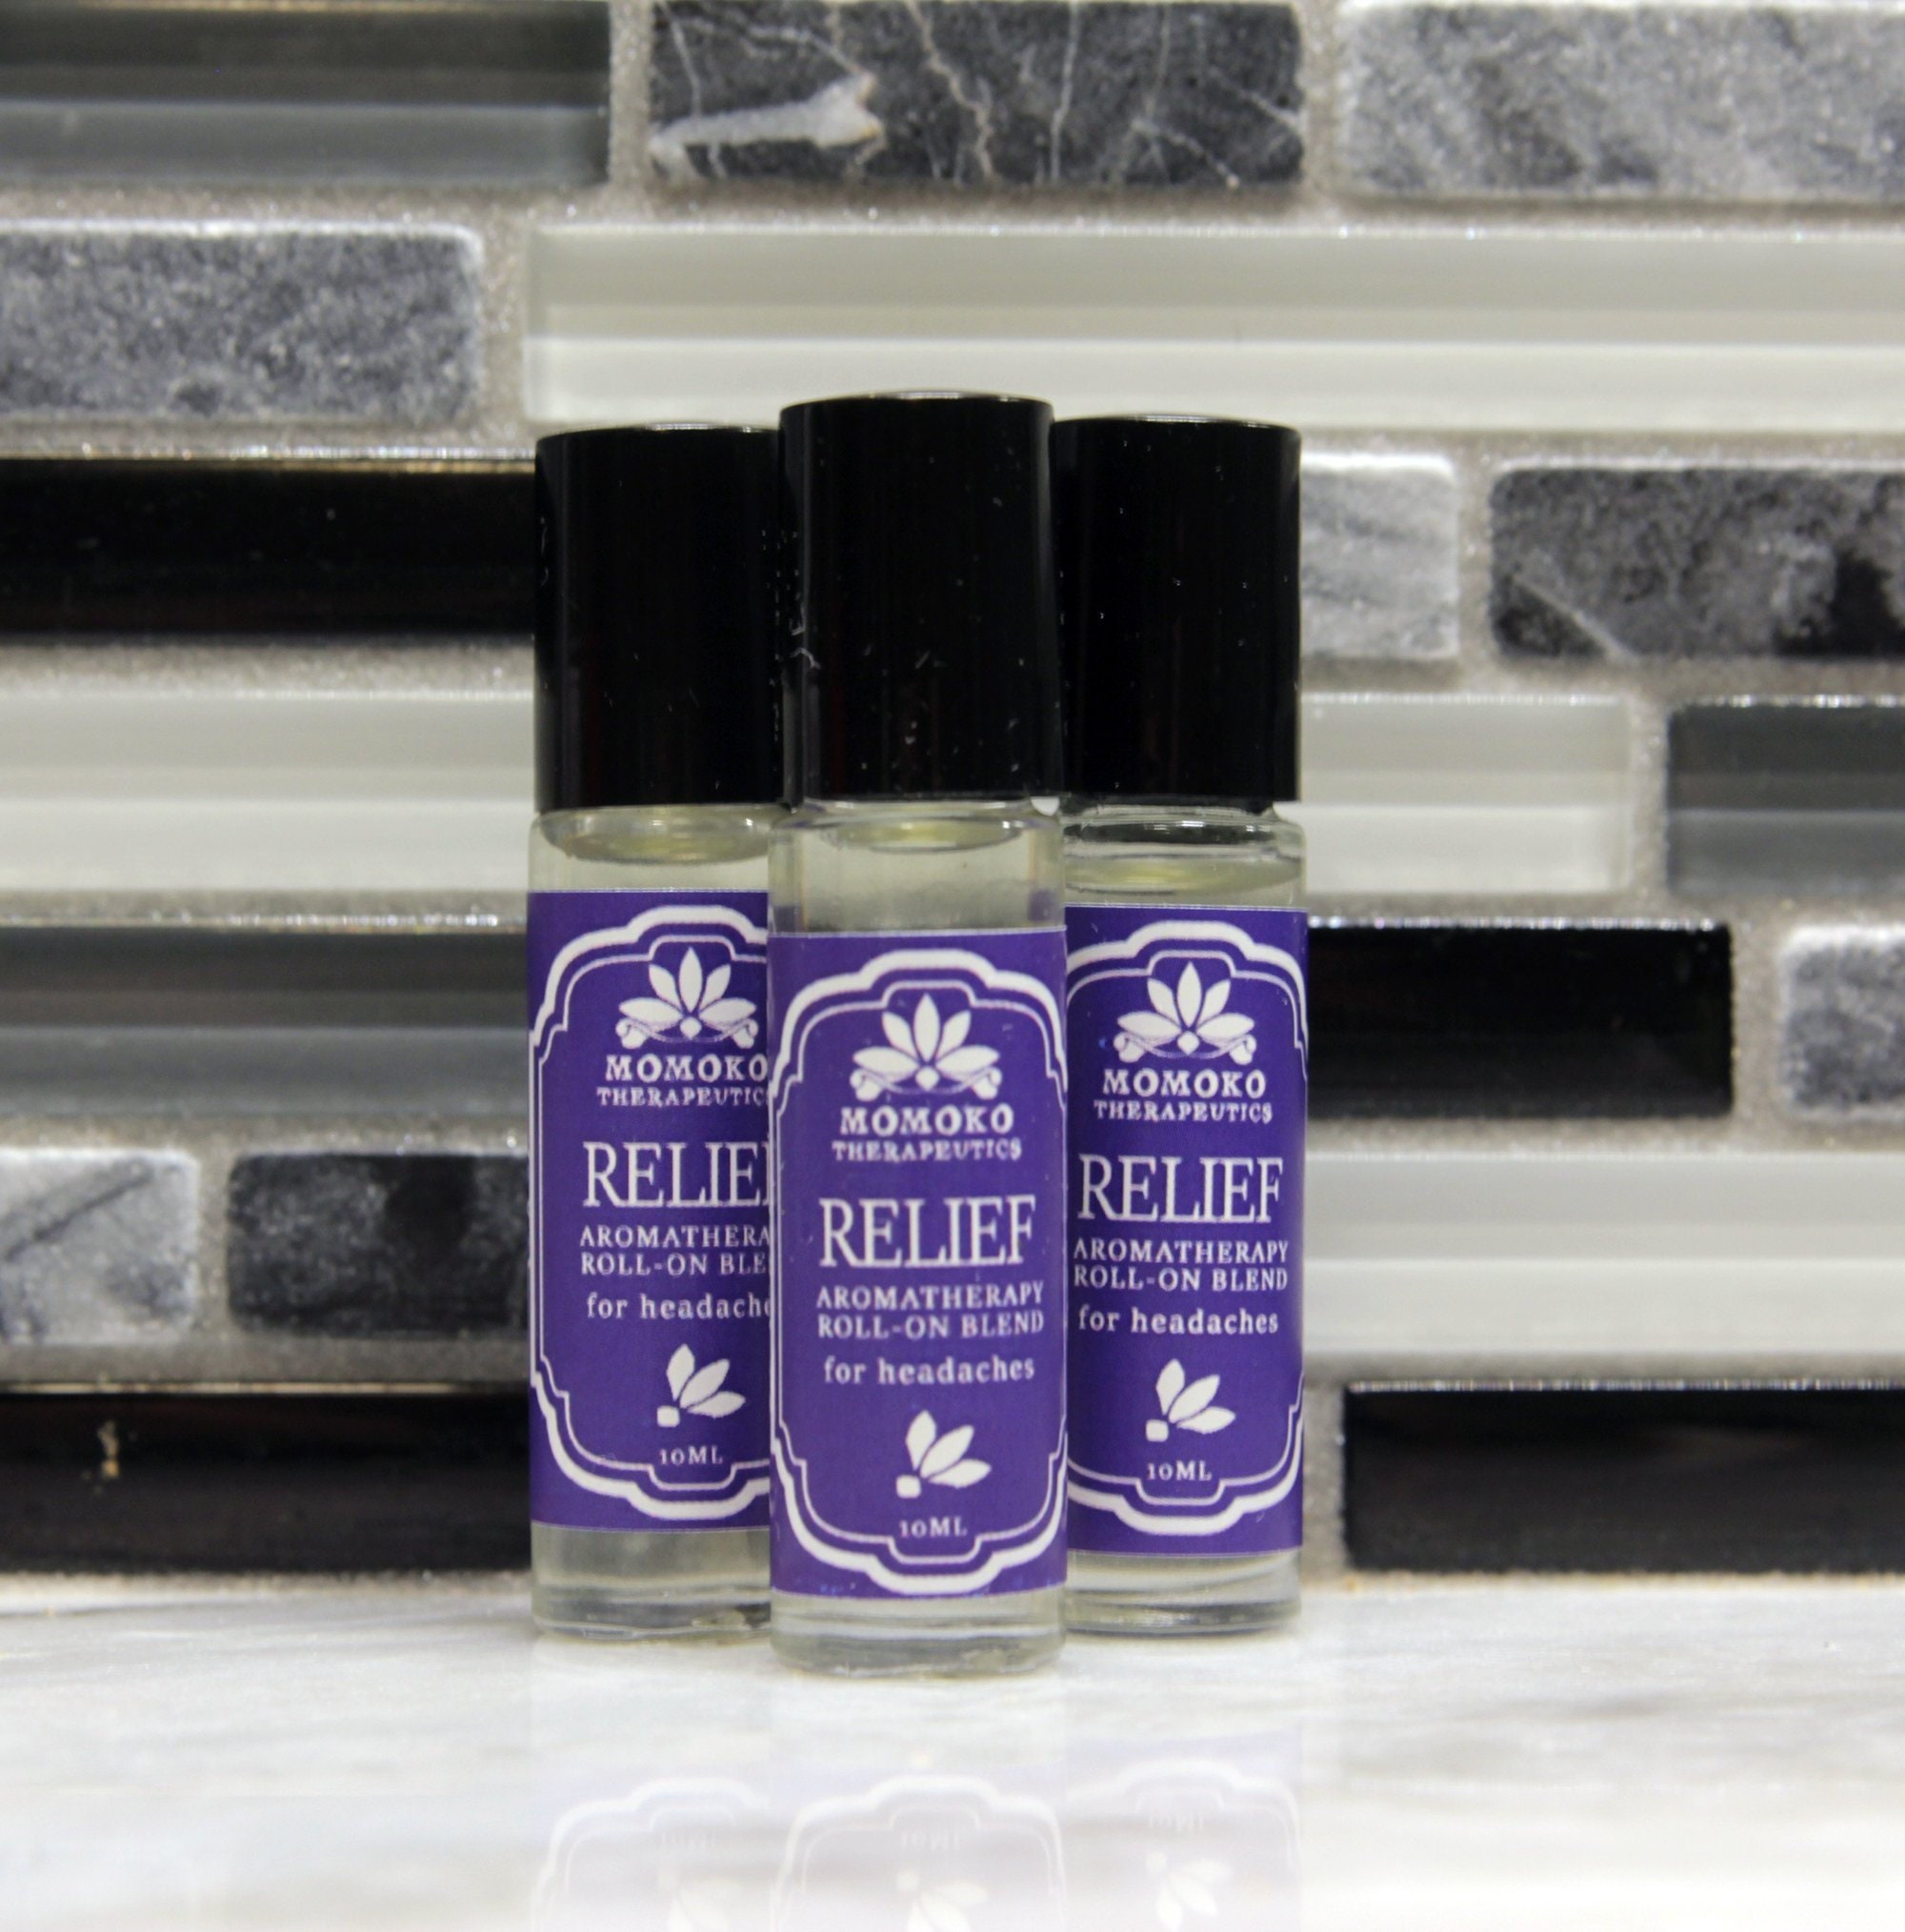 Relief Aromatherapy Roll-On Blend - All Natural, Vegan, Organic Perfume Oil For Migraines, Headaches, & Tension